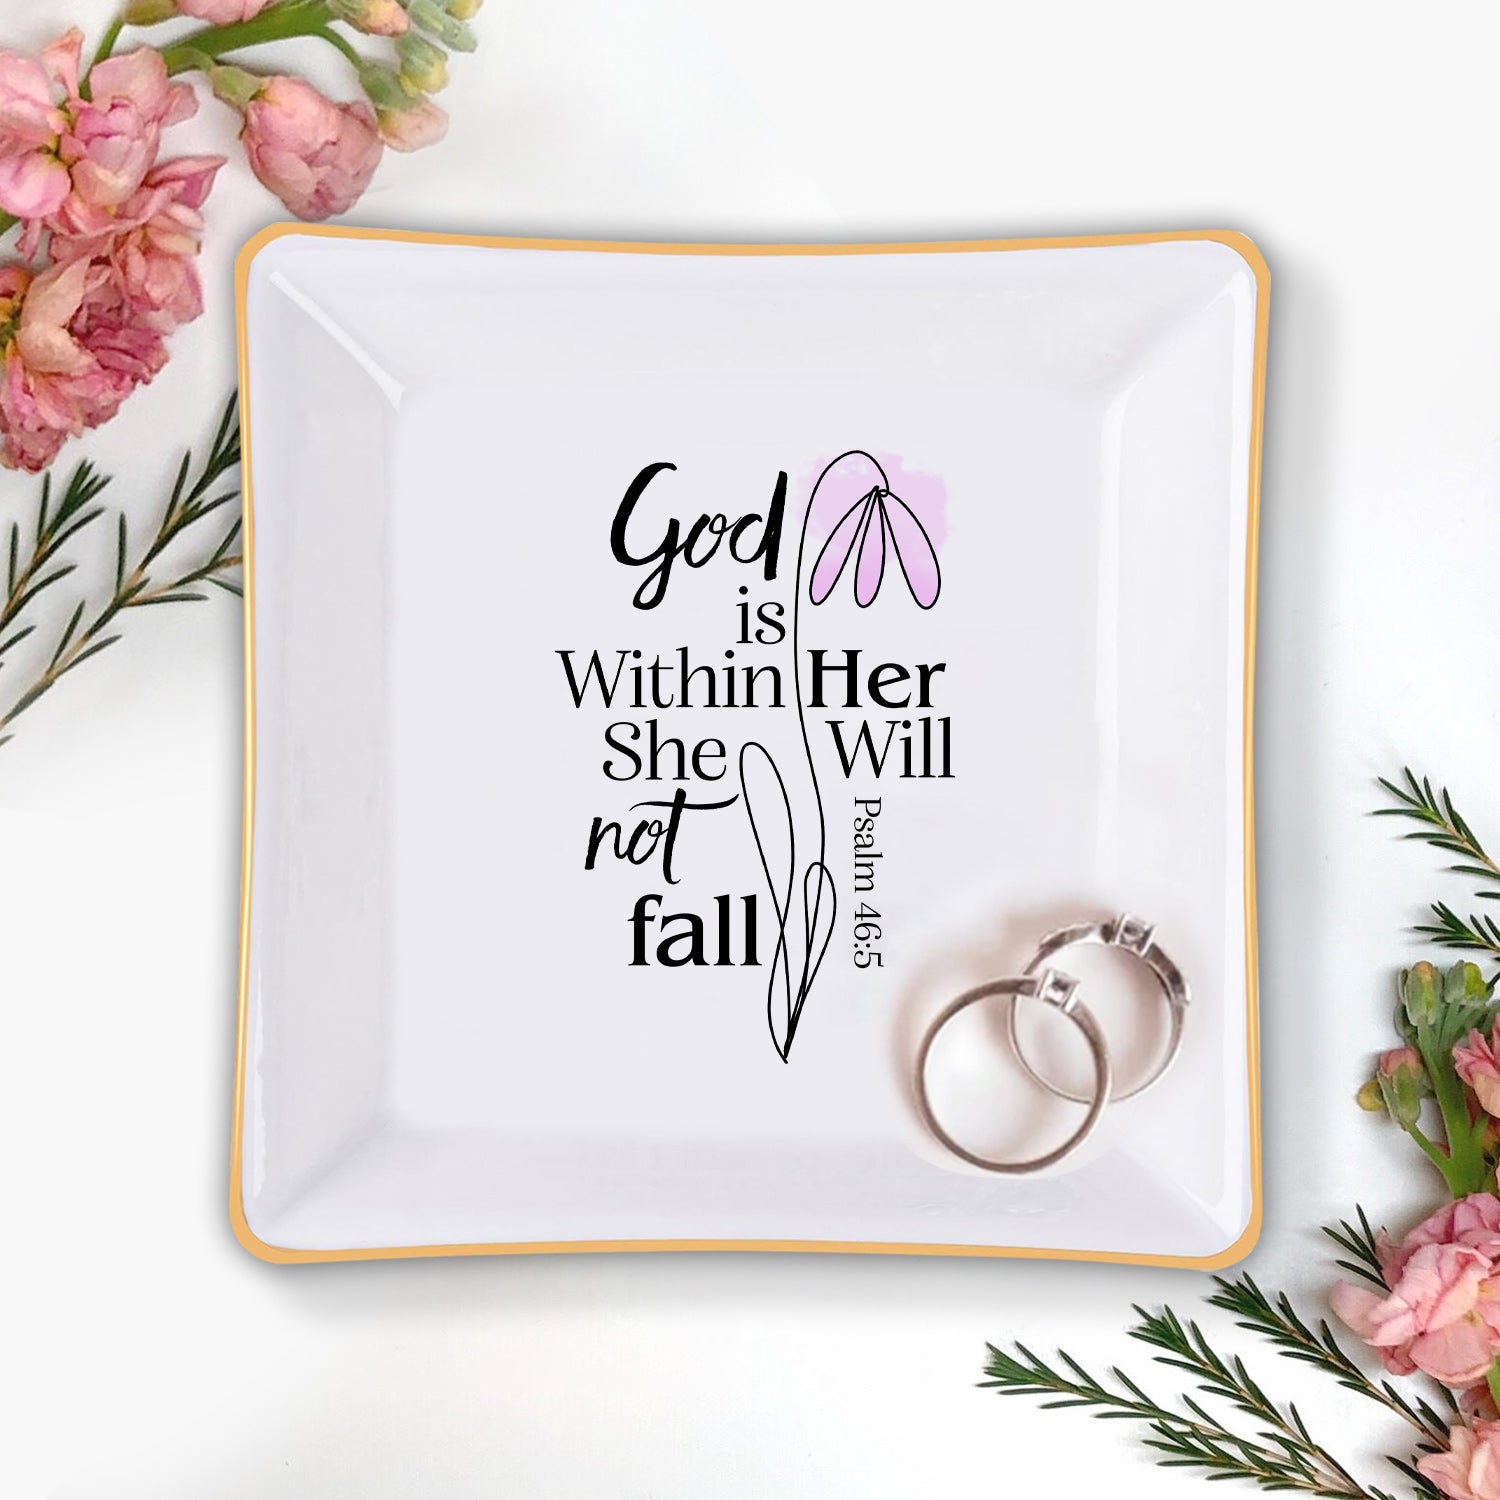 She Is Not Fall God Is Within Her Christian Gift Inspirational Religious Gift Ceramic Ring Dish